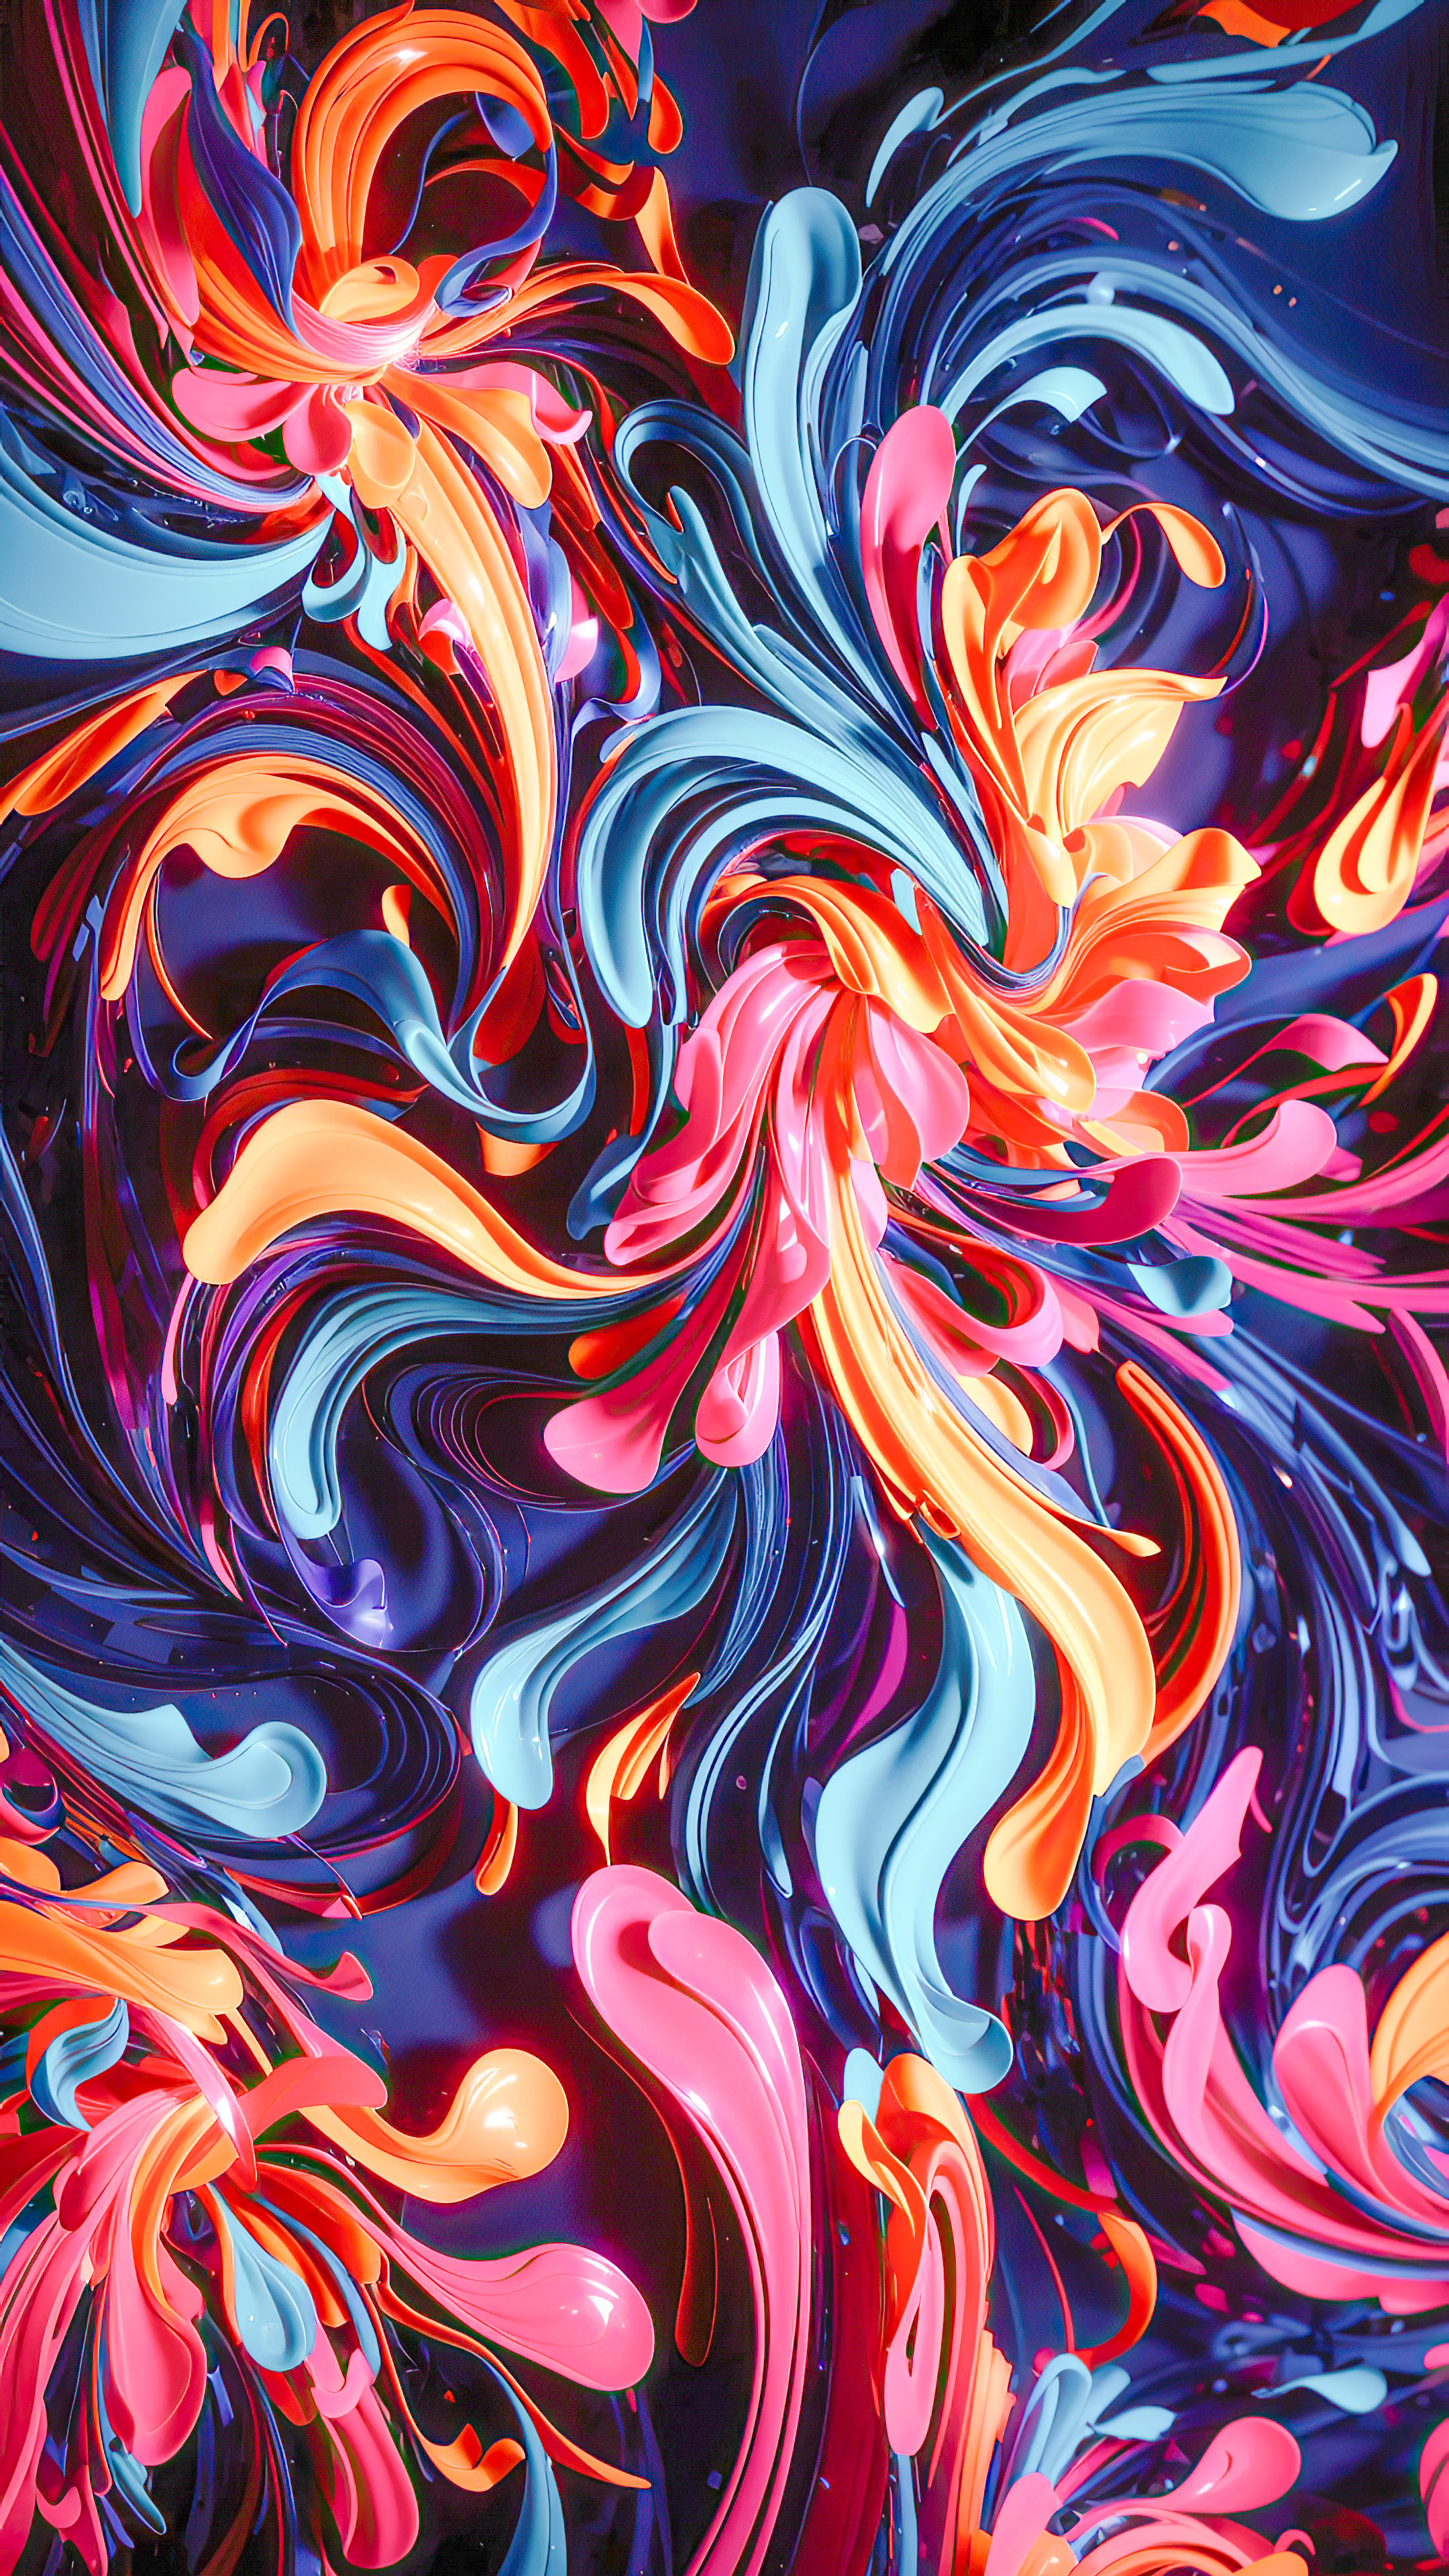 Immerse your iPhone in a world of vibrant swirls with our abstract iPhone wallpaper.